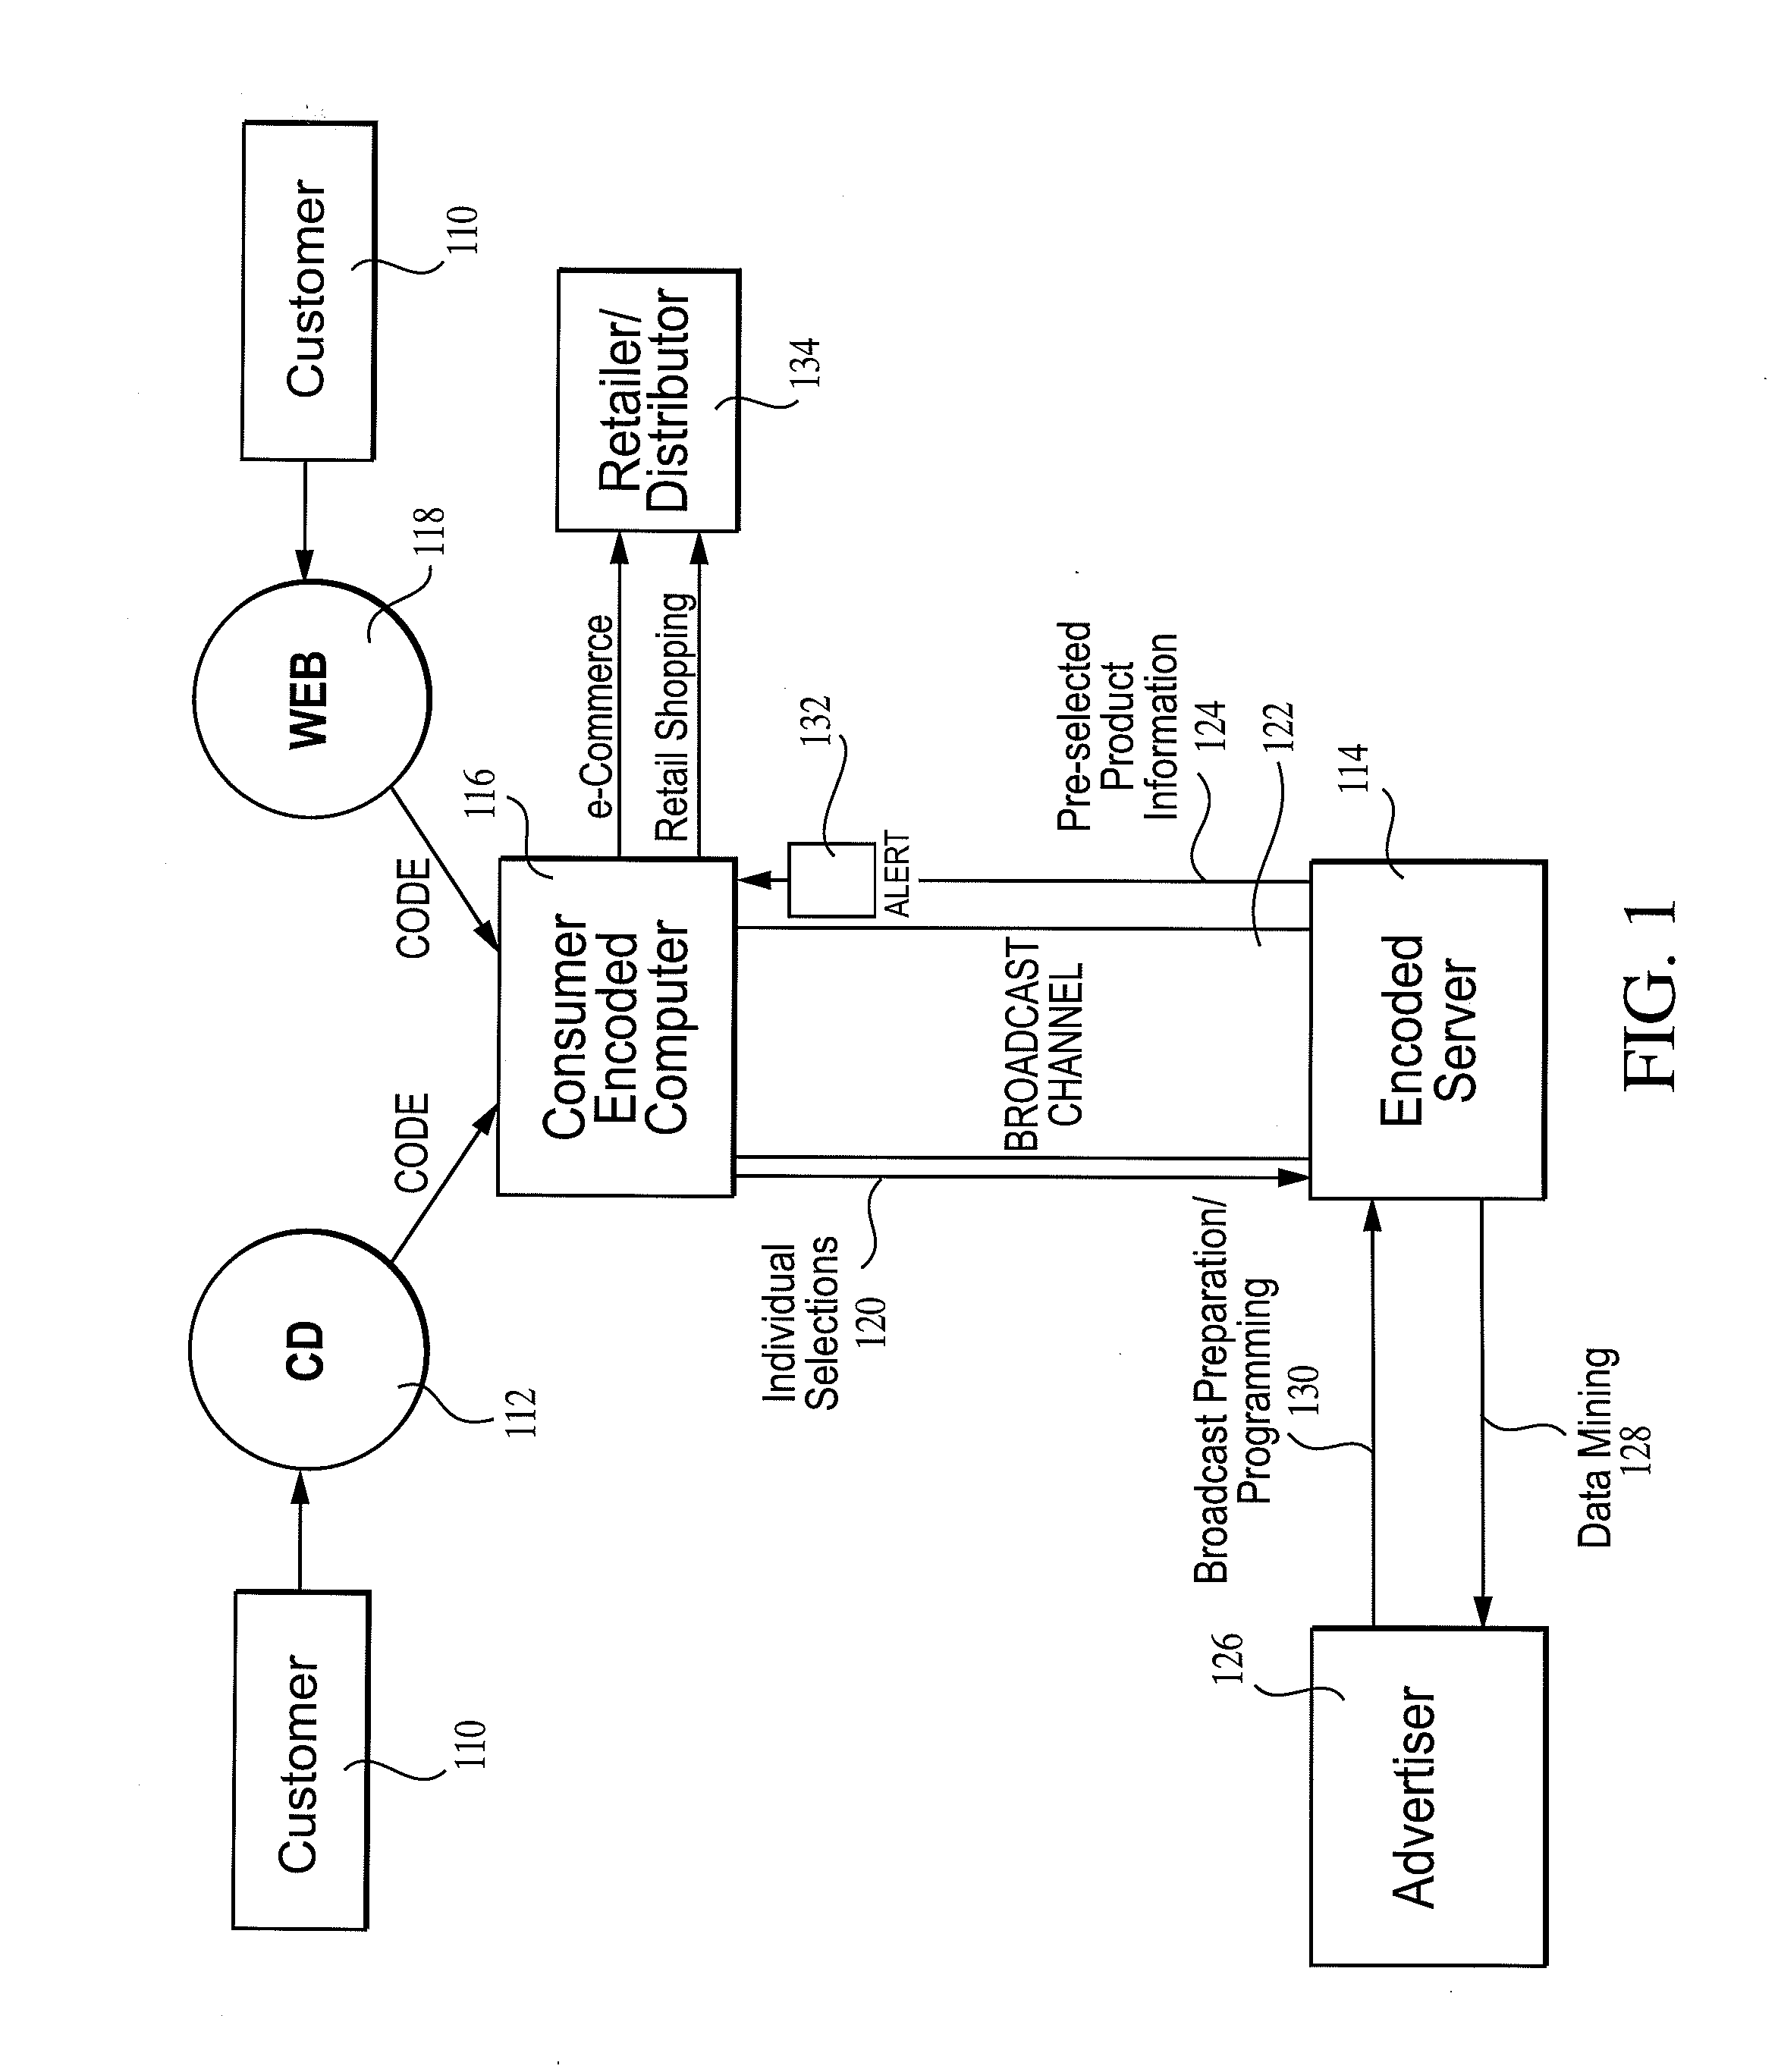 Multimedia player and browser system